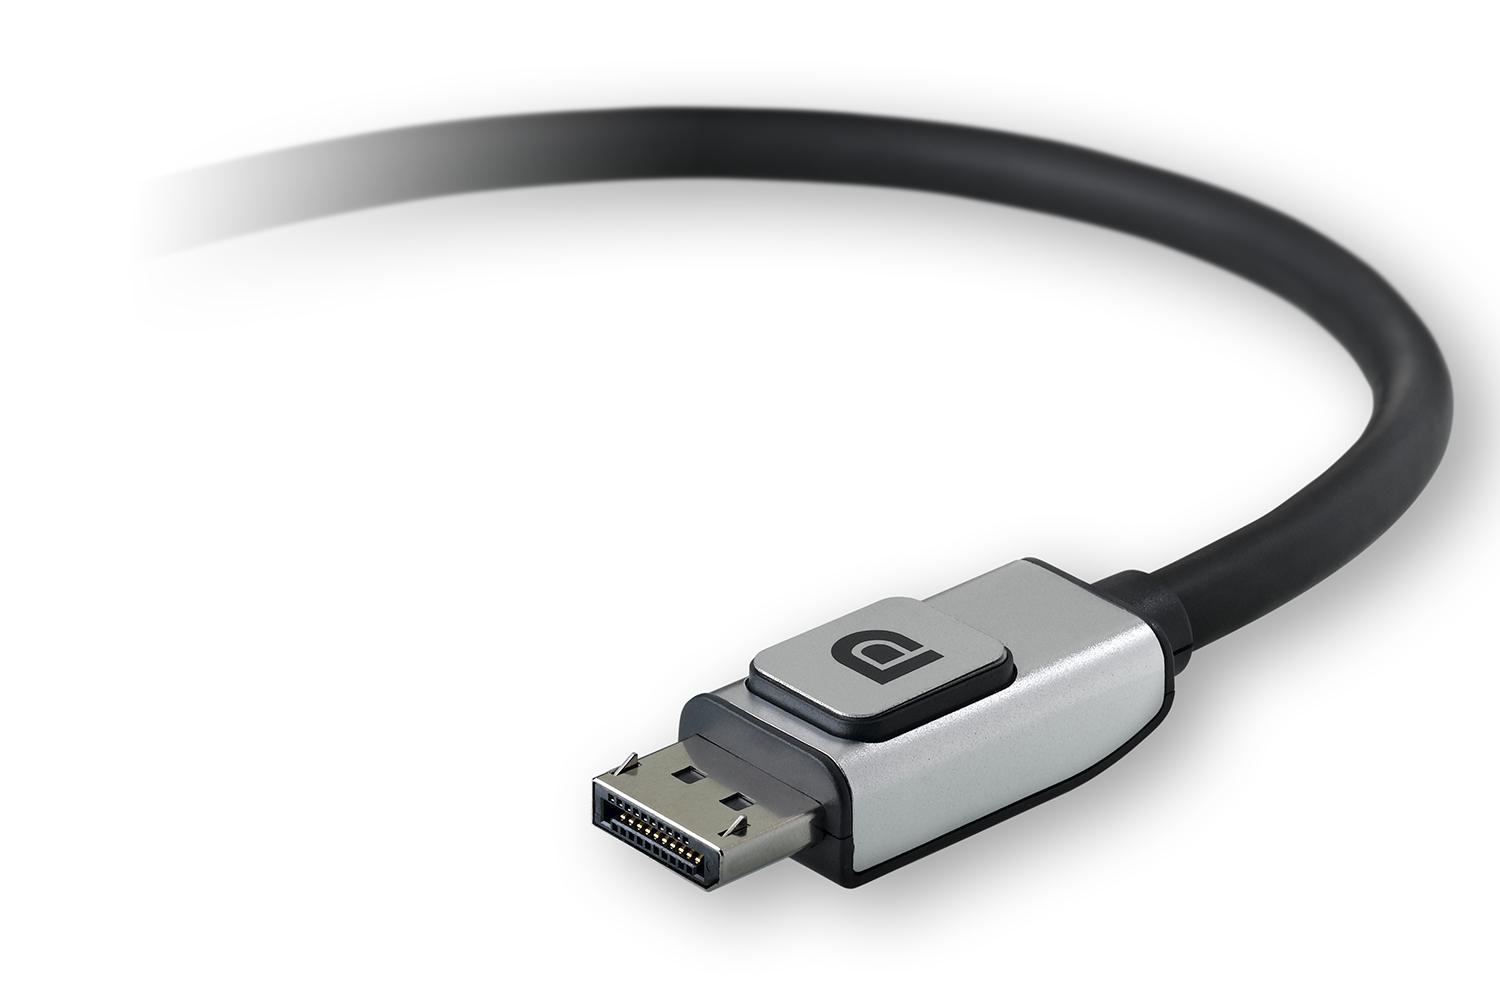 What is DisplayPort 2.0, and when will it be available? – iVANKY